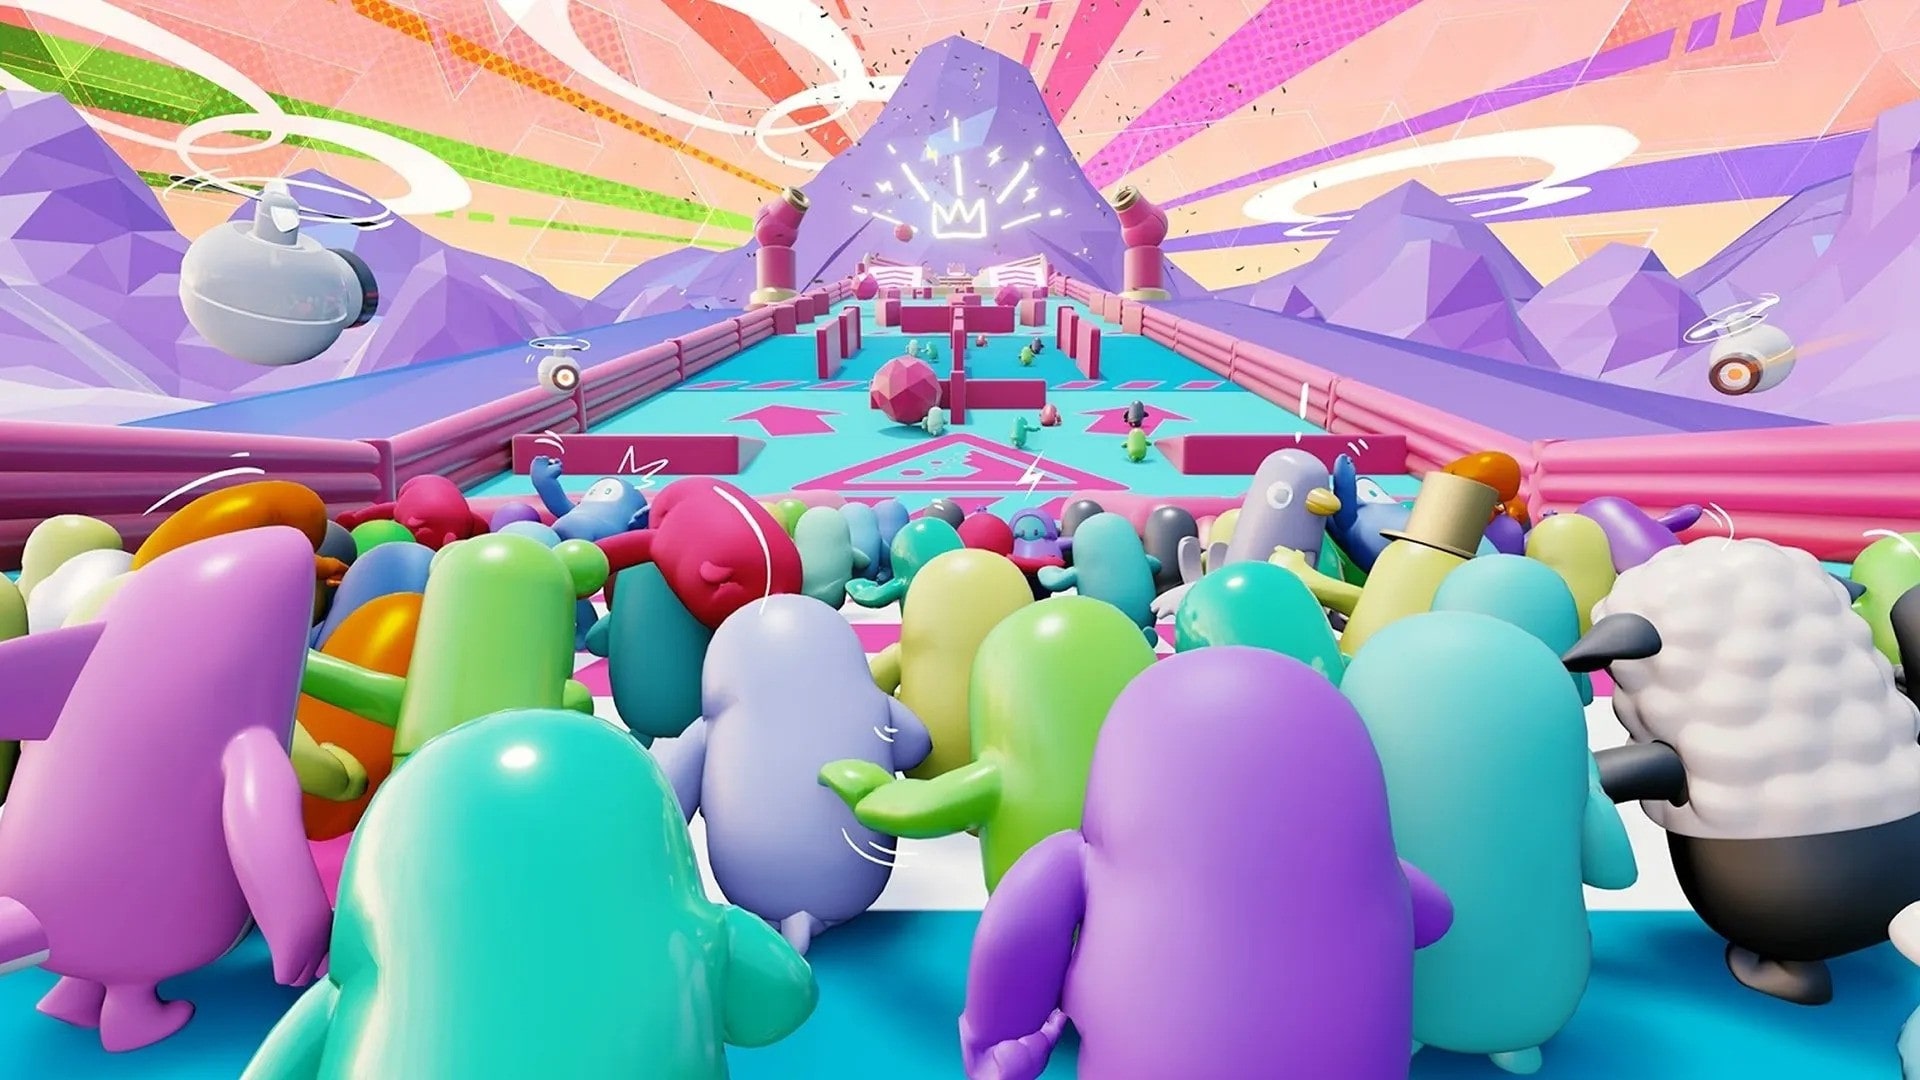 Illustration of colorful Fall Guys characters competing in an obstacle course